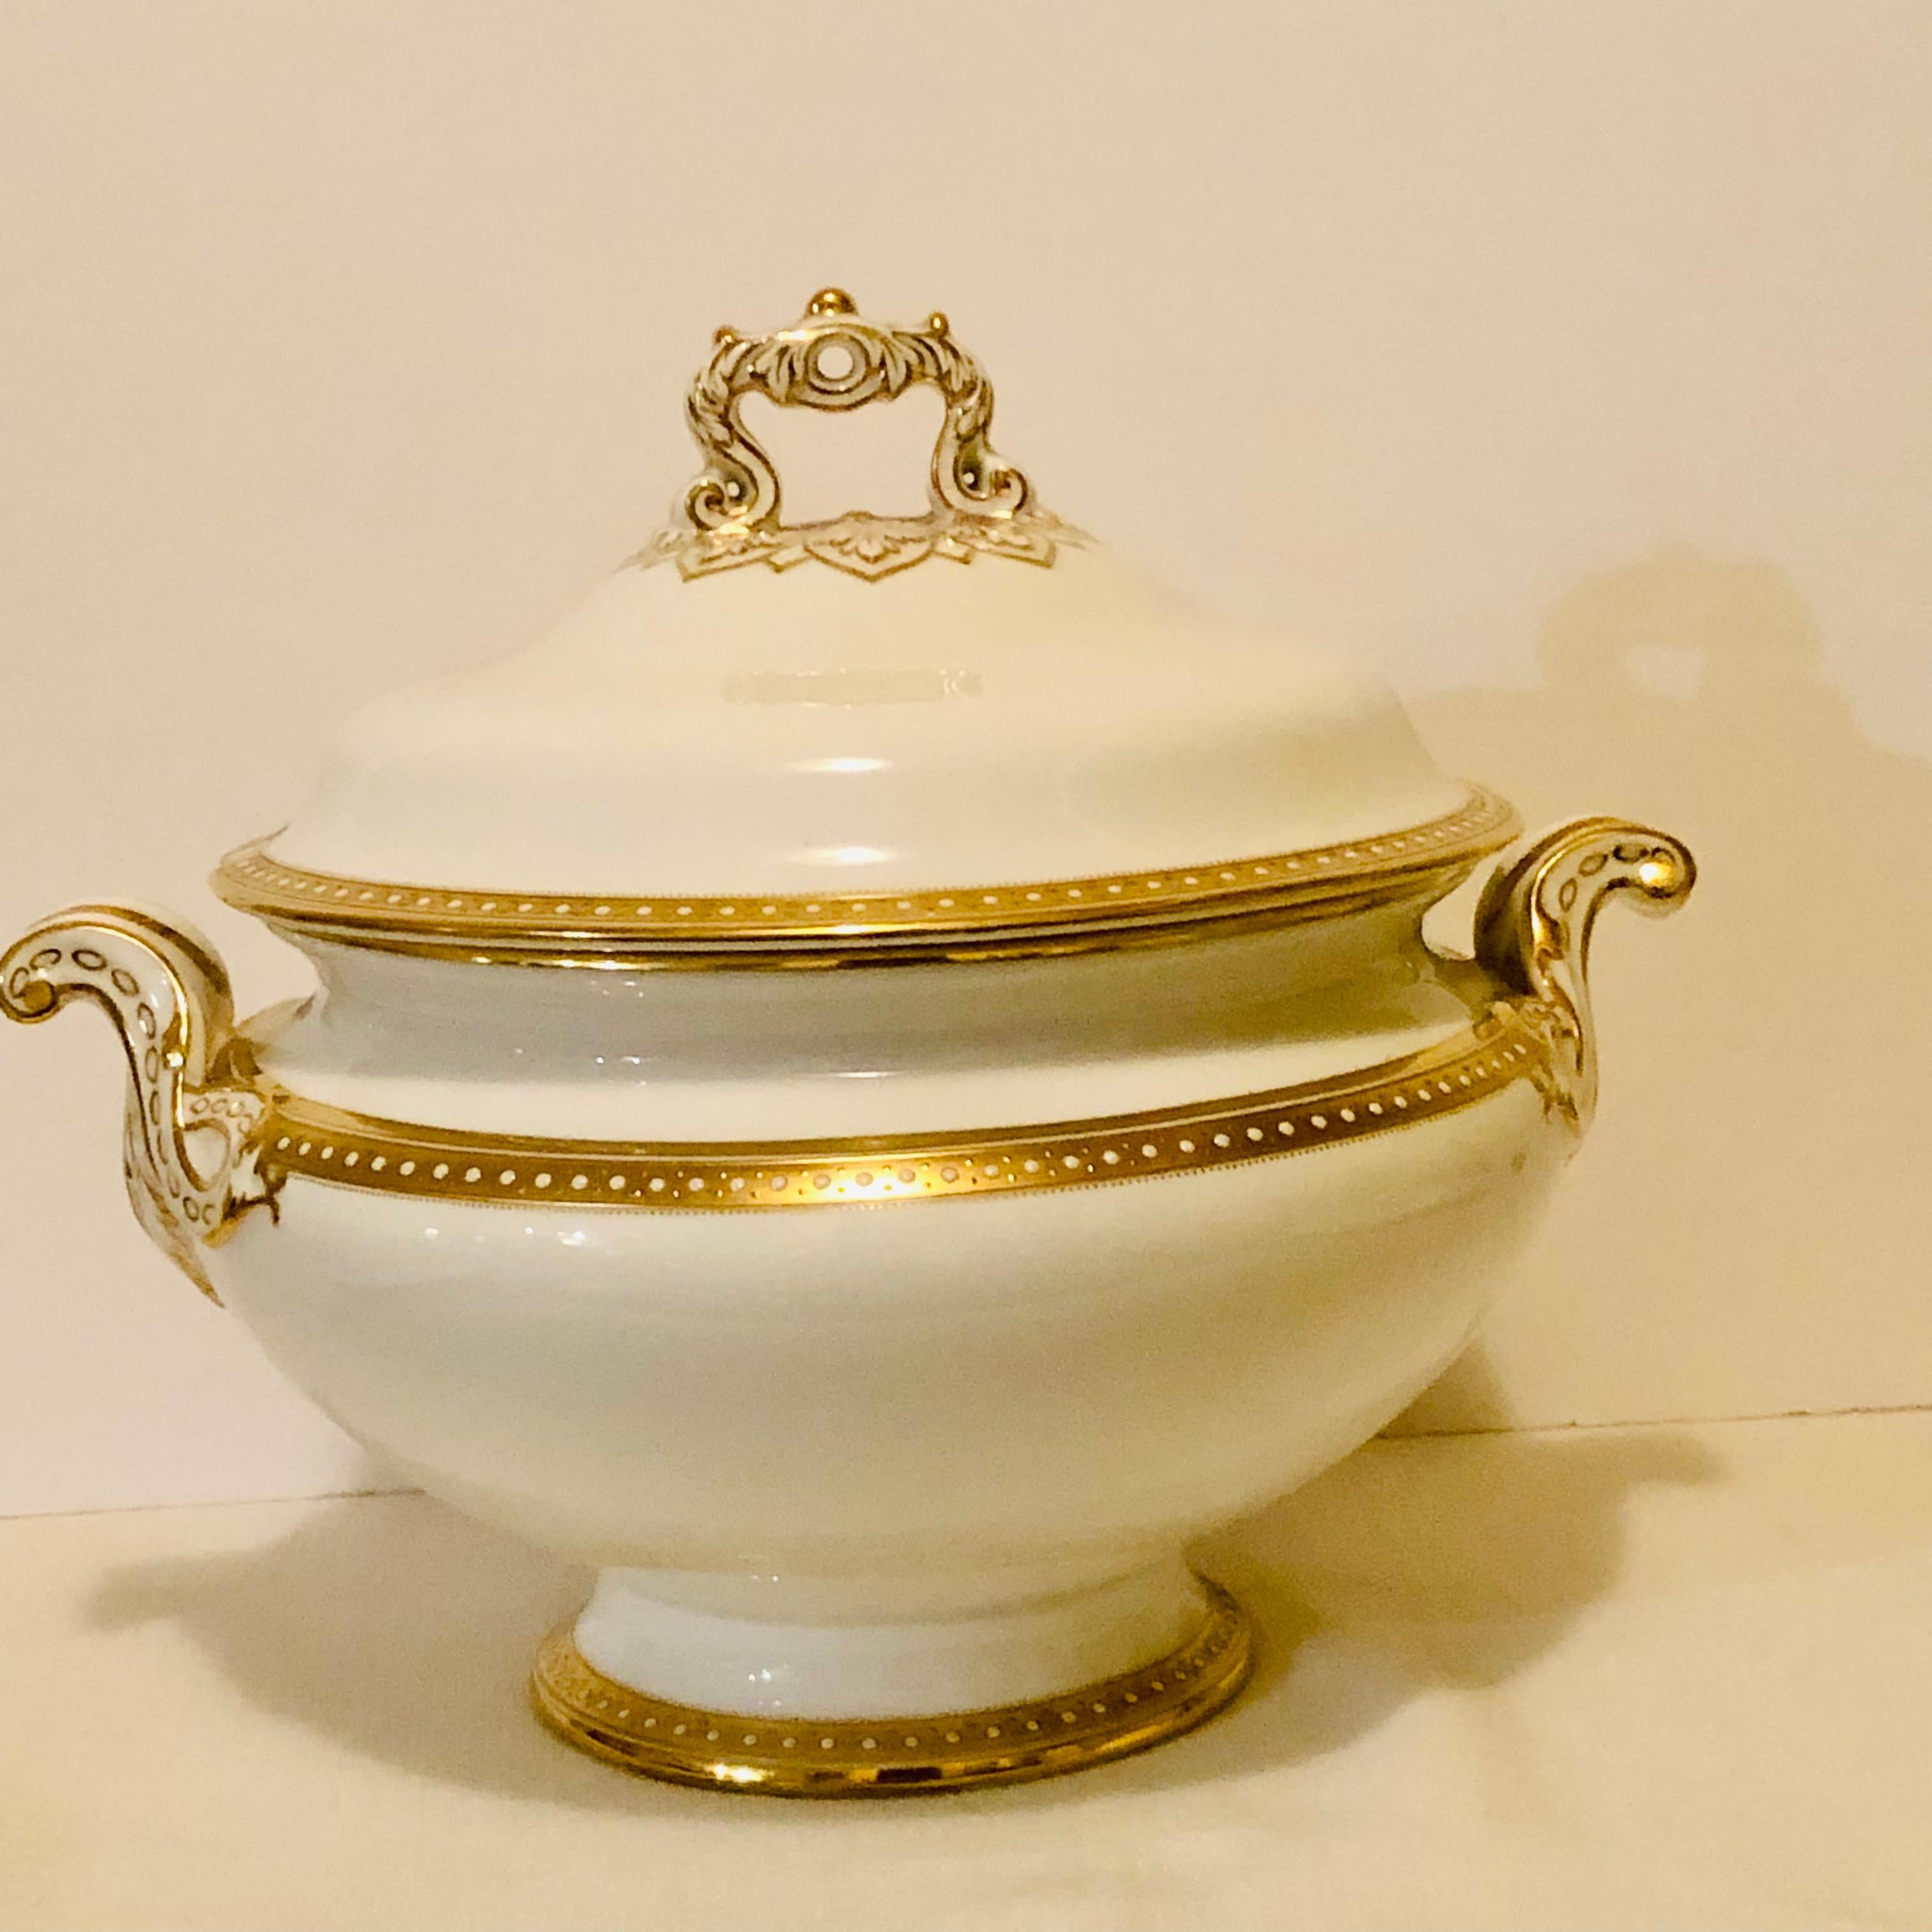 Rococo Copeland Spode Soup Tureen with Gold Border and White Jeweling Made for T. Goode